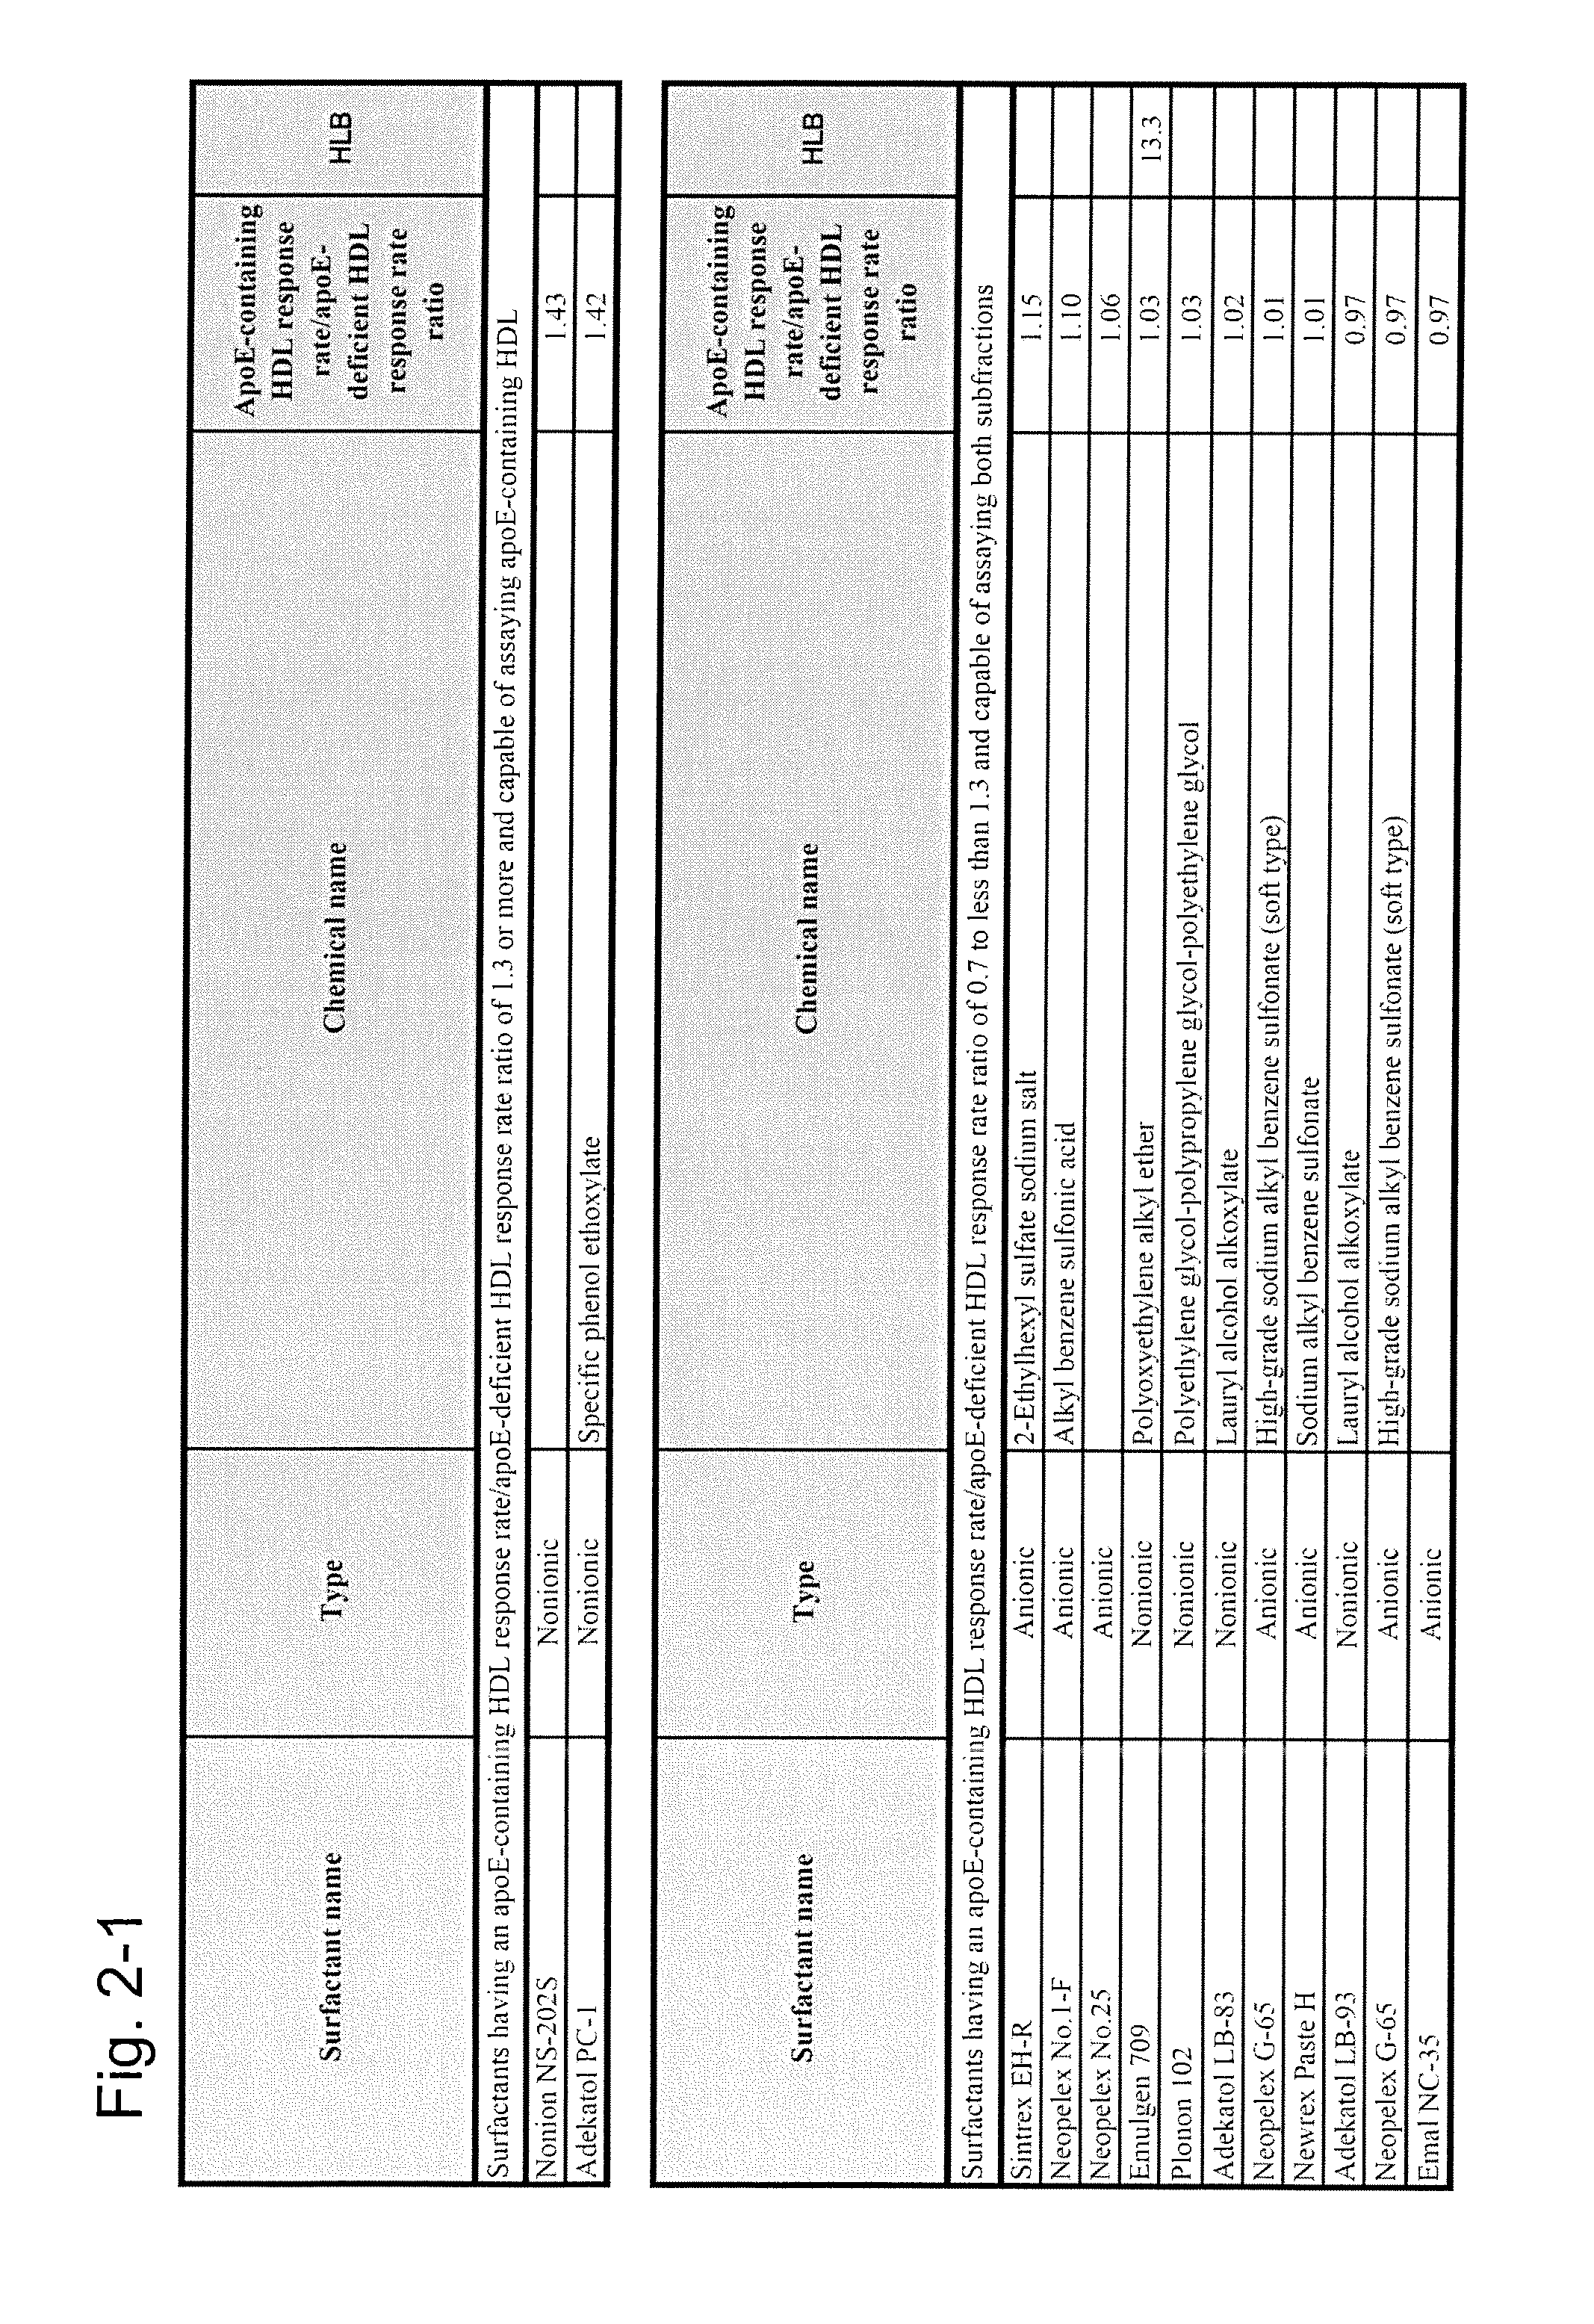 METHOD FOR ASSAYING CHOLESTEROL IN ApoE-CONTAINING HDL